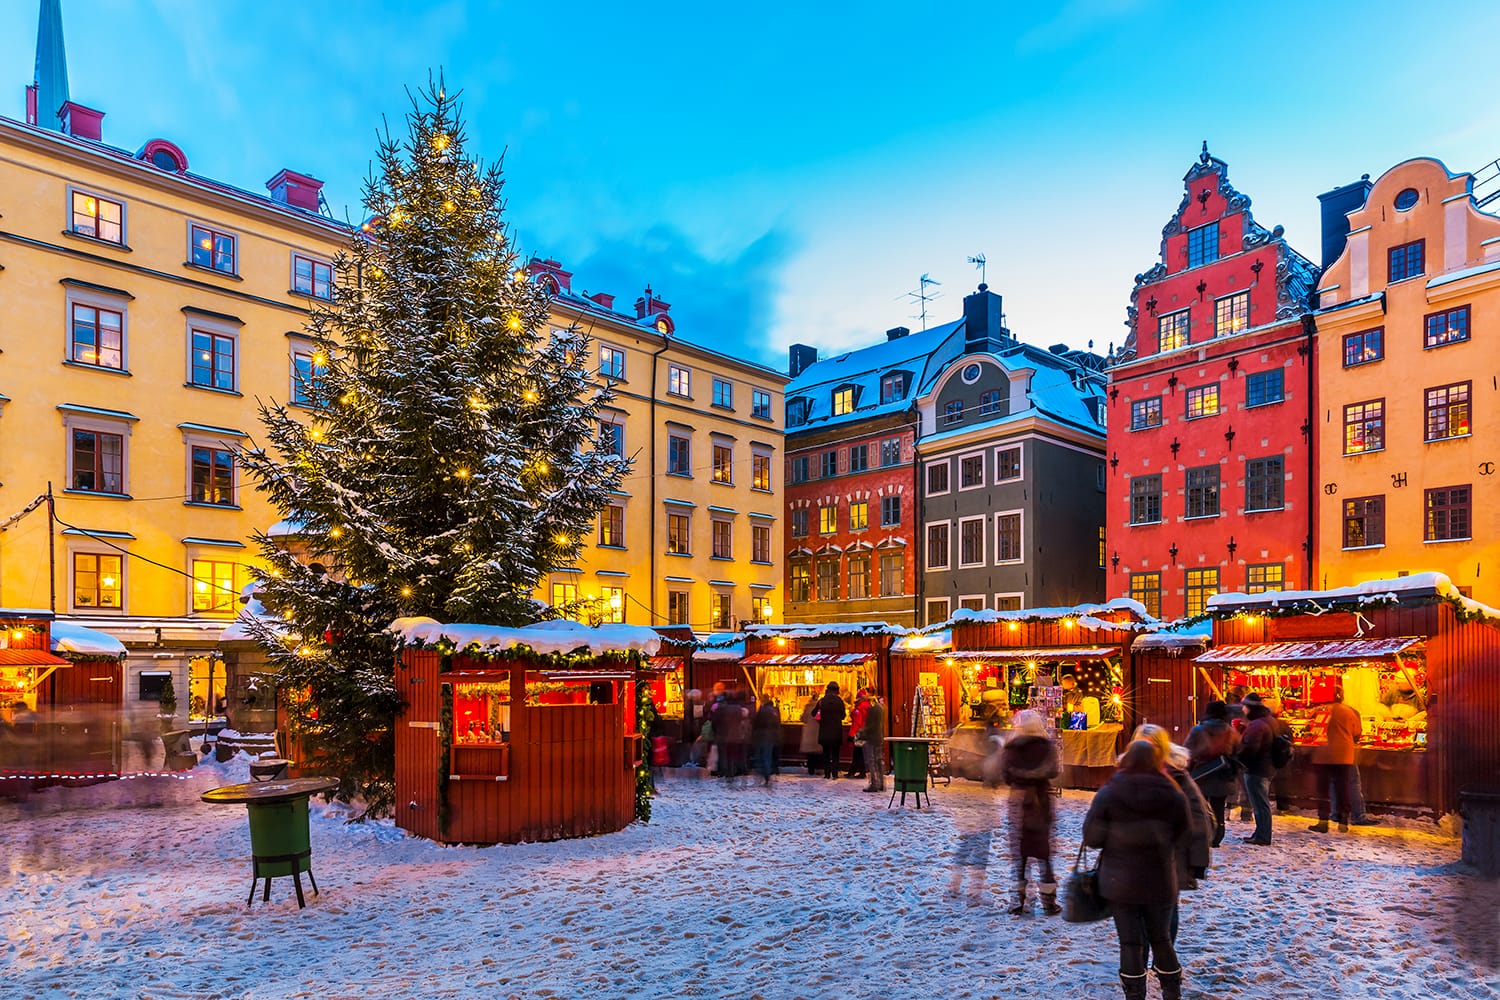 Beautiful snowy winter scenery of Christmas holiday fair at the Big Square (Stortorget) in the Old Town (Gamla Stan) in Stockholm, Sweden